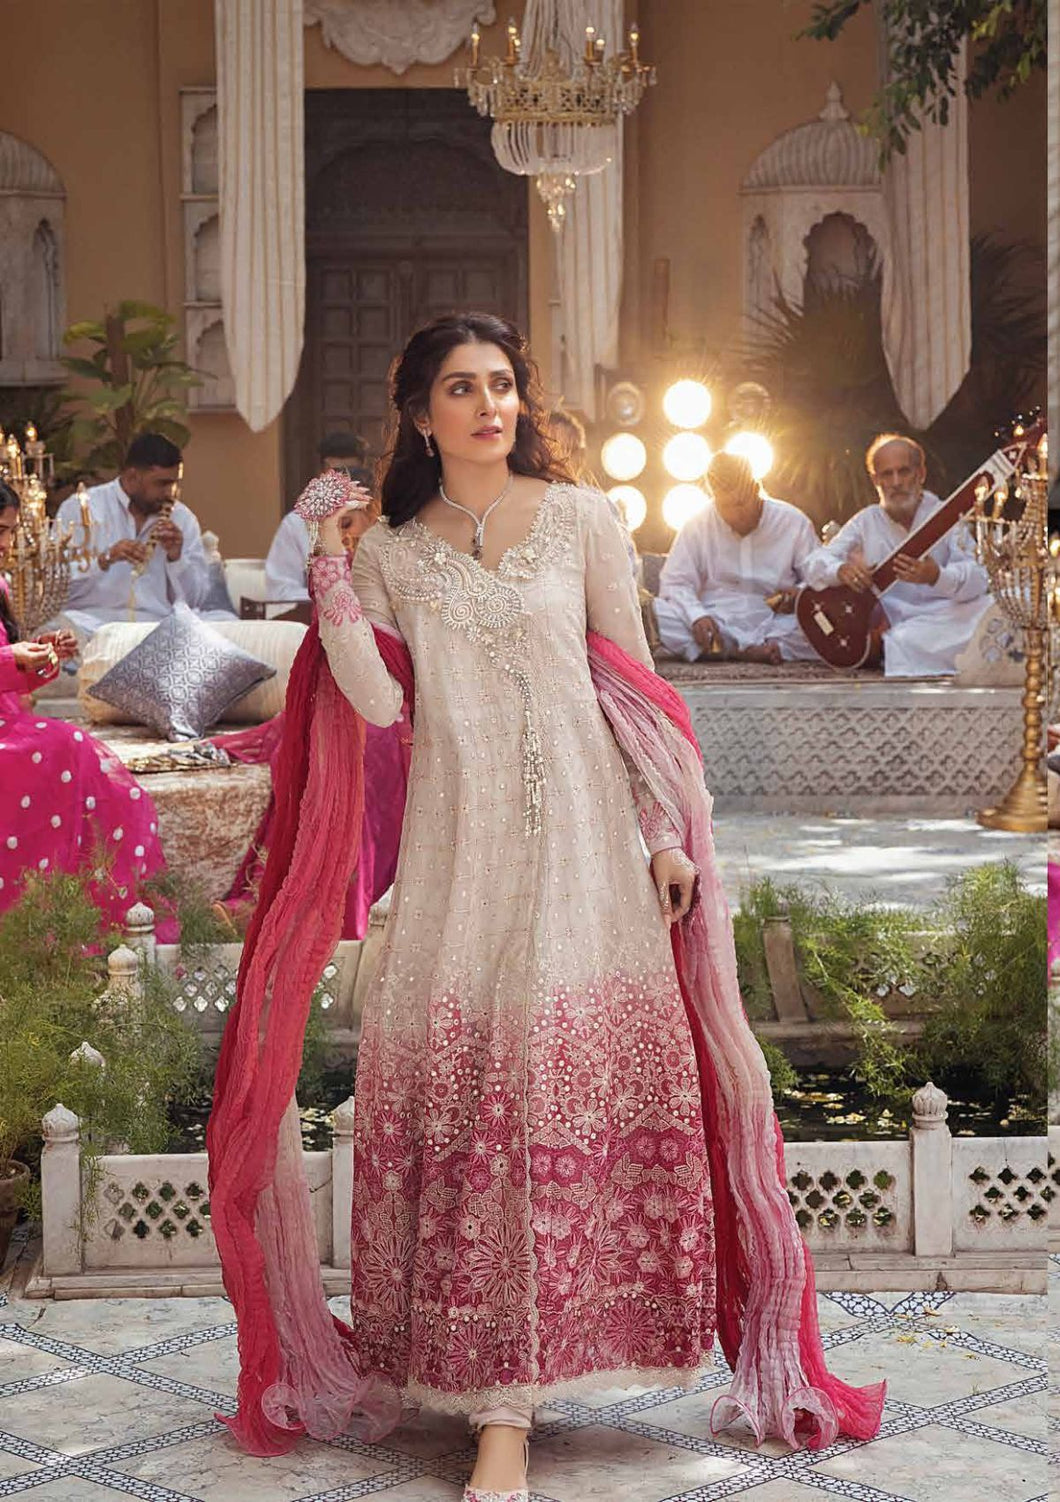 Mushq Dastaan Chikankari 2021 - MIHR | 01 Off White Chikankari dress is exclusively available on lebasonline. We have largest varieties of Pakistani Designer Dress of various brands such as Maria B, Mushq 2021. The dresses are customized as Pakistani boutique dress in UK. Get your dress in UK, USA from lebaasonline!